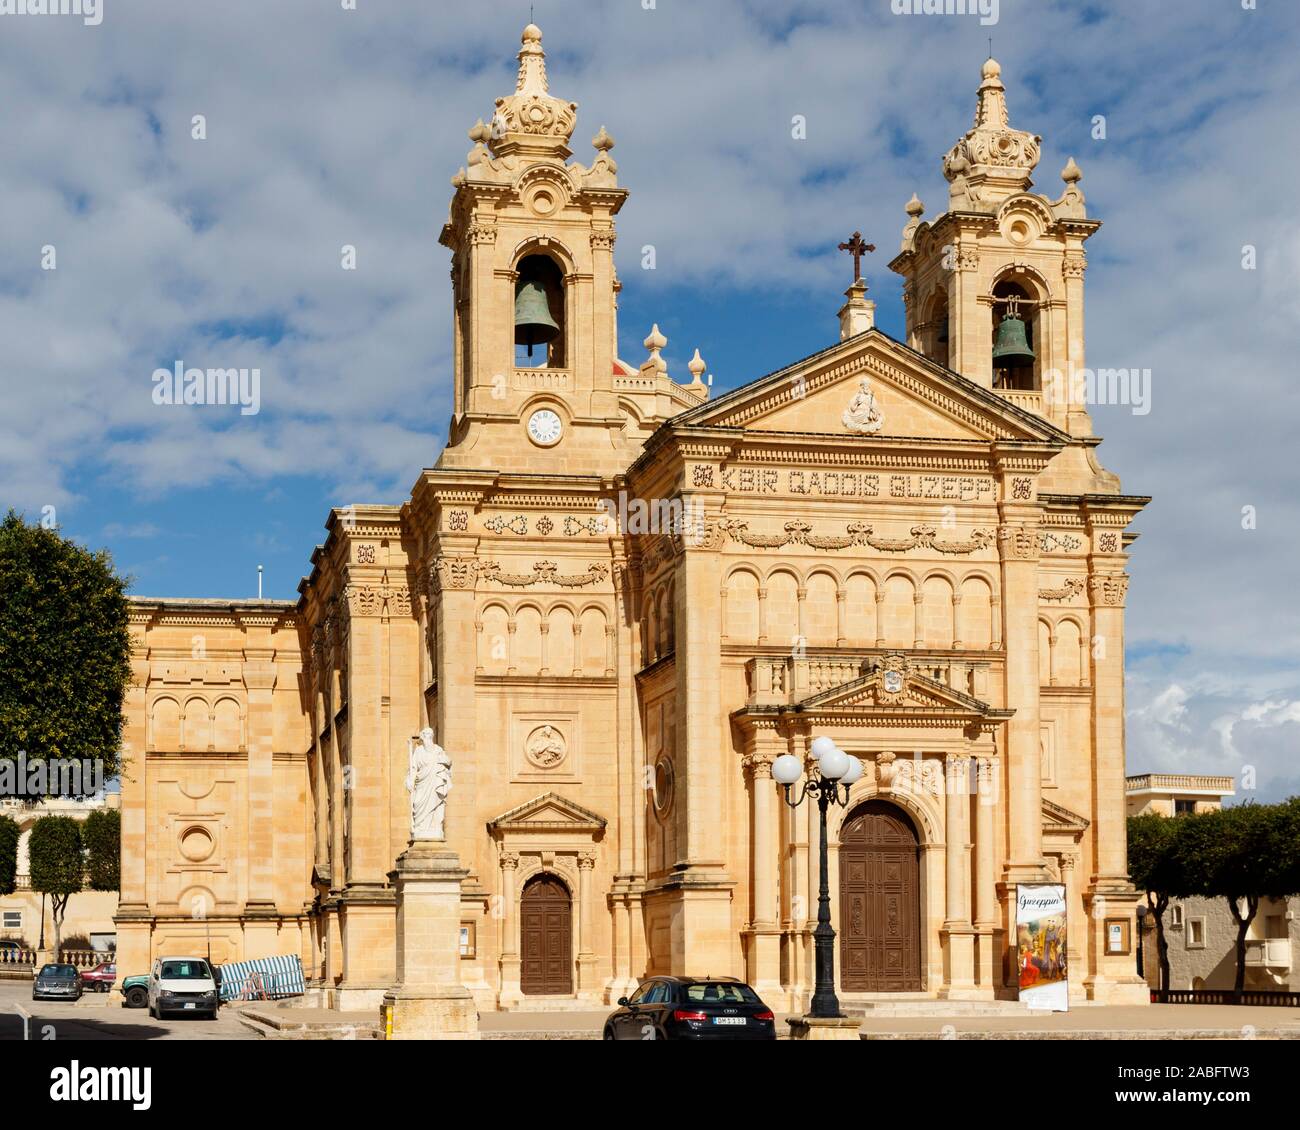 The 1882 parish church of Qala, dedicated to the Immaculate Conception and Saint Joseph. Built in Baroque style and consecrated in 1904. Gozo, Malta. Stock Photo